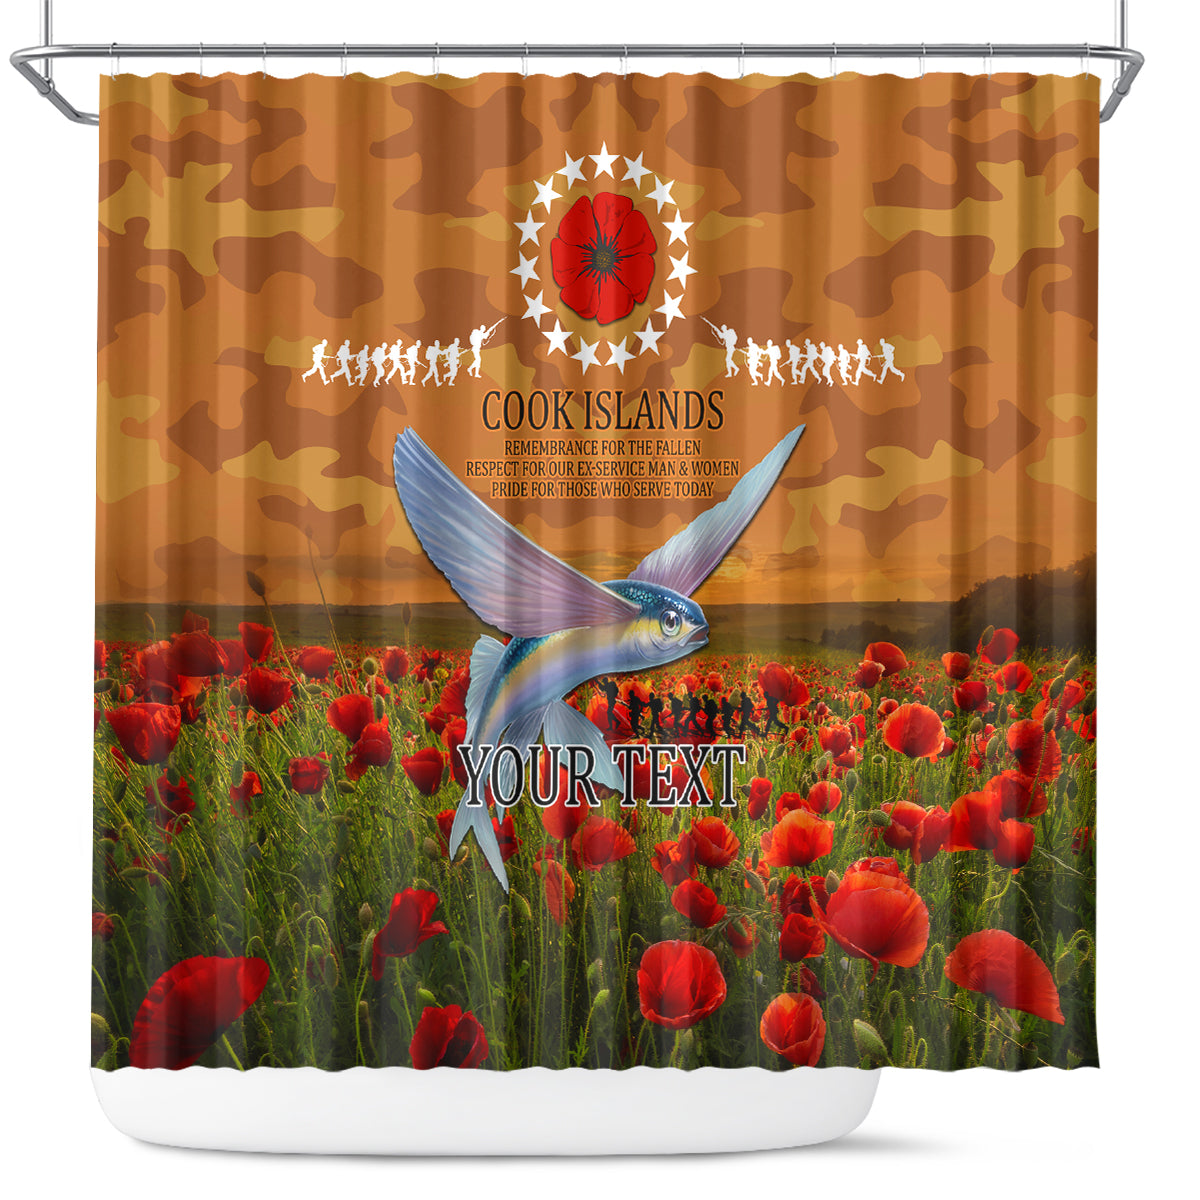 Cook Islands ANZAC Day Personalised Shower Curtain with Poppy Field LT9 Art - Polynesian Pride